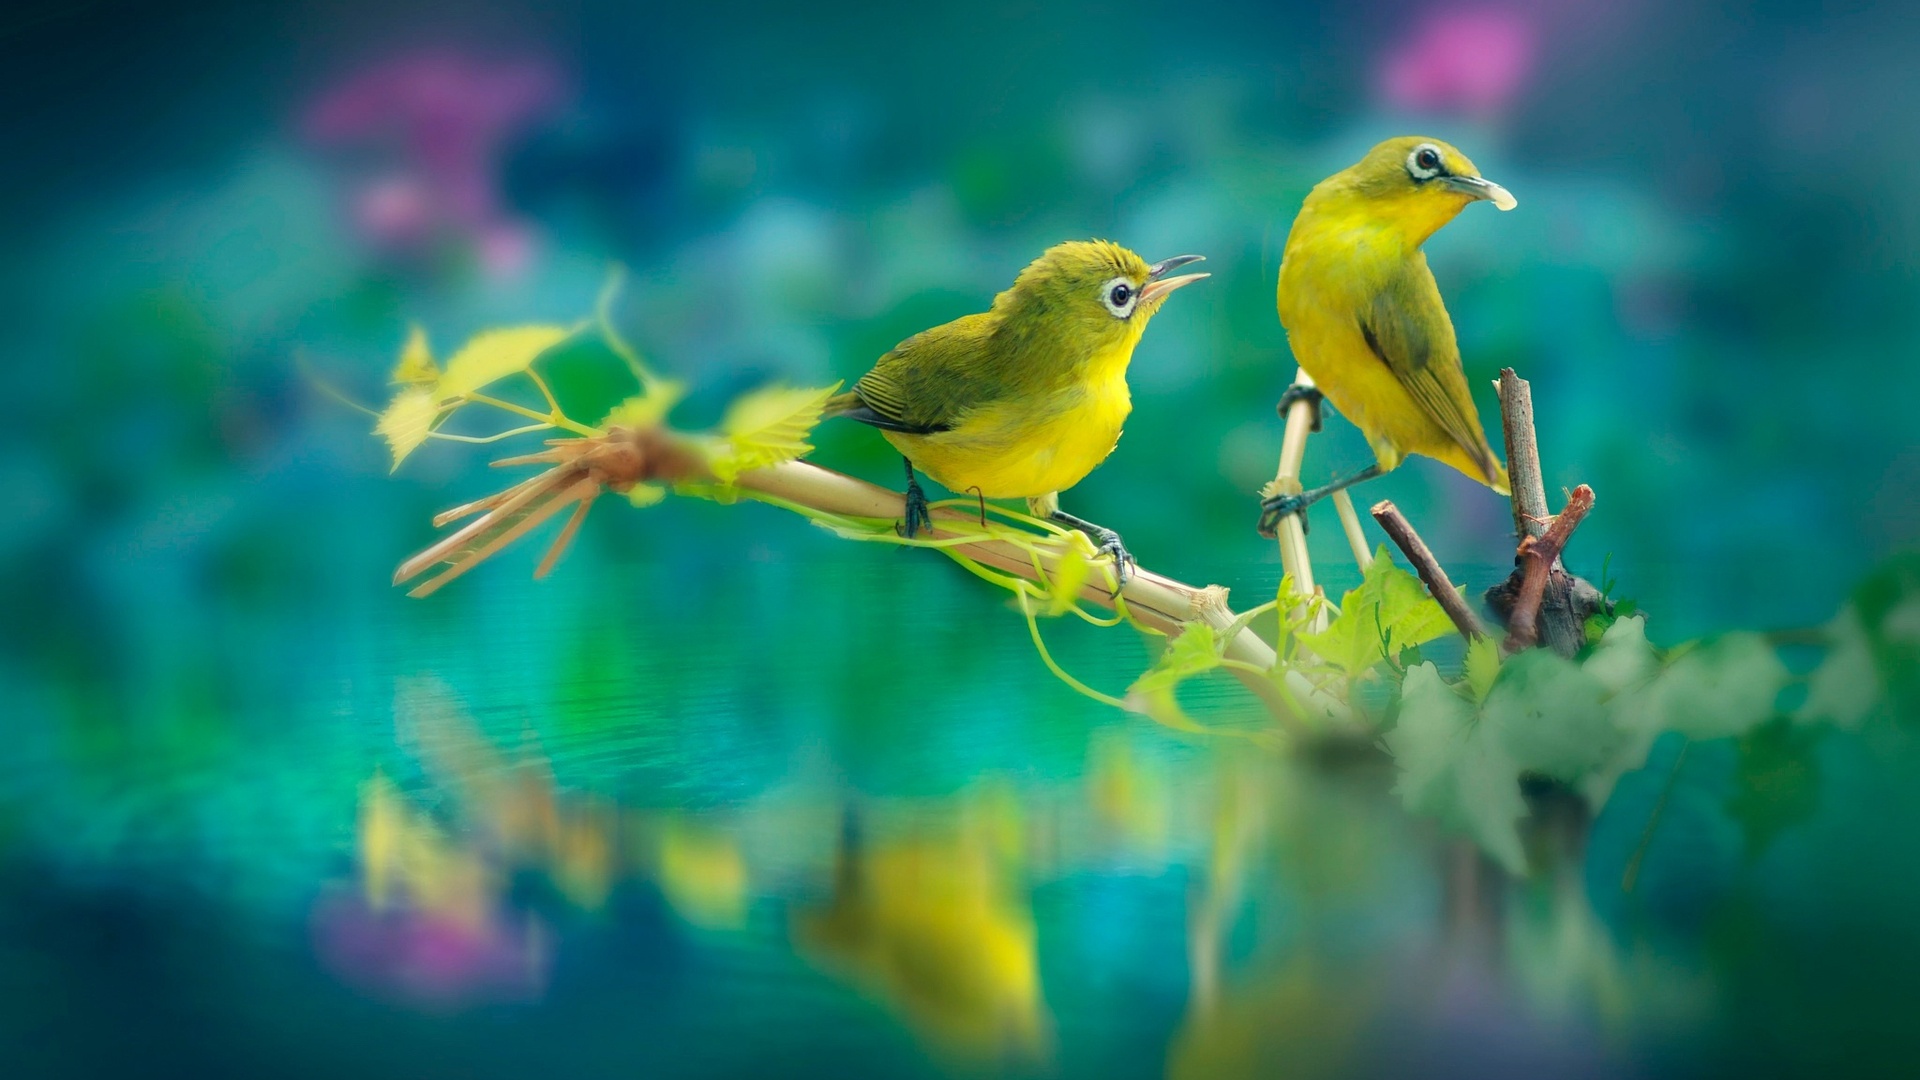 X beautiful birds laptop full hd p hd k wallpapers images backgrounds photos and pictures